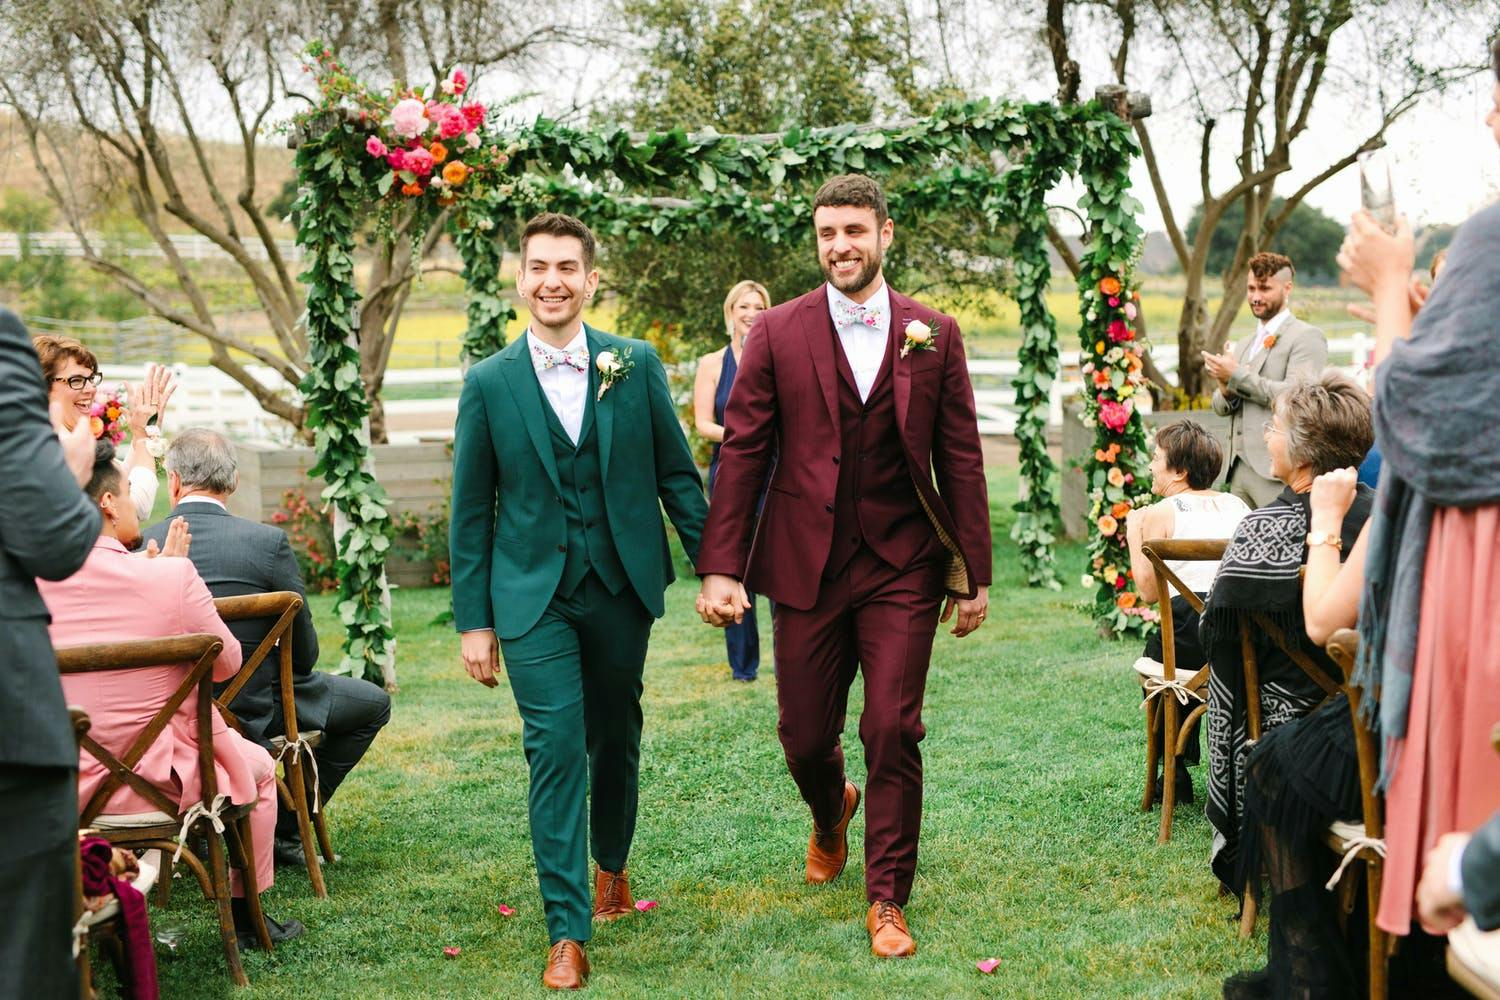 Colorful wedding a Top Event of 2020 | PartySlate